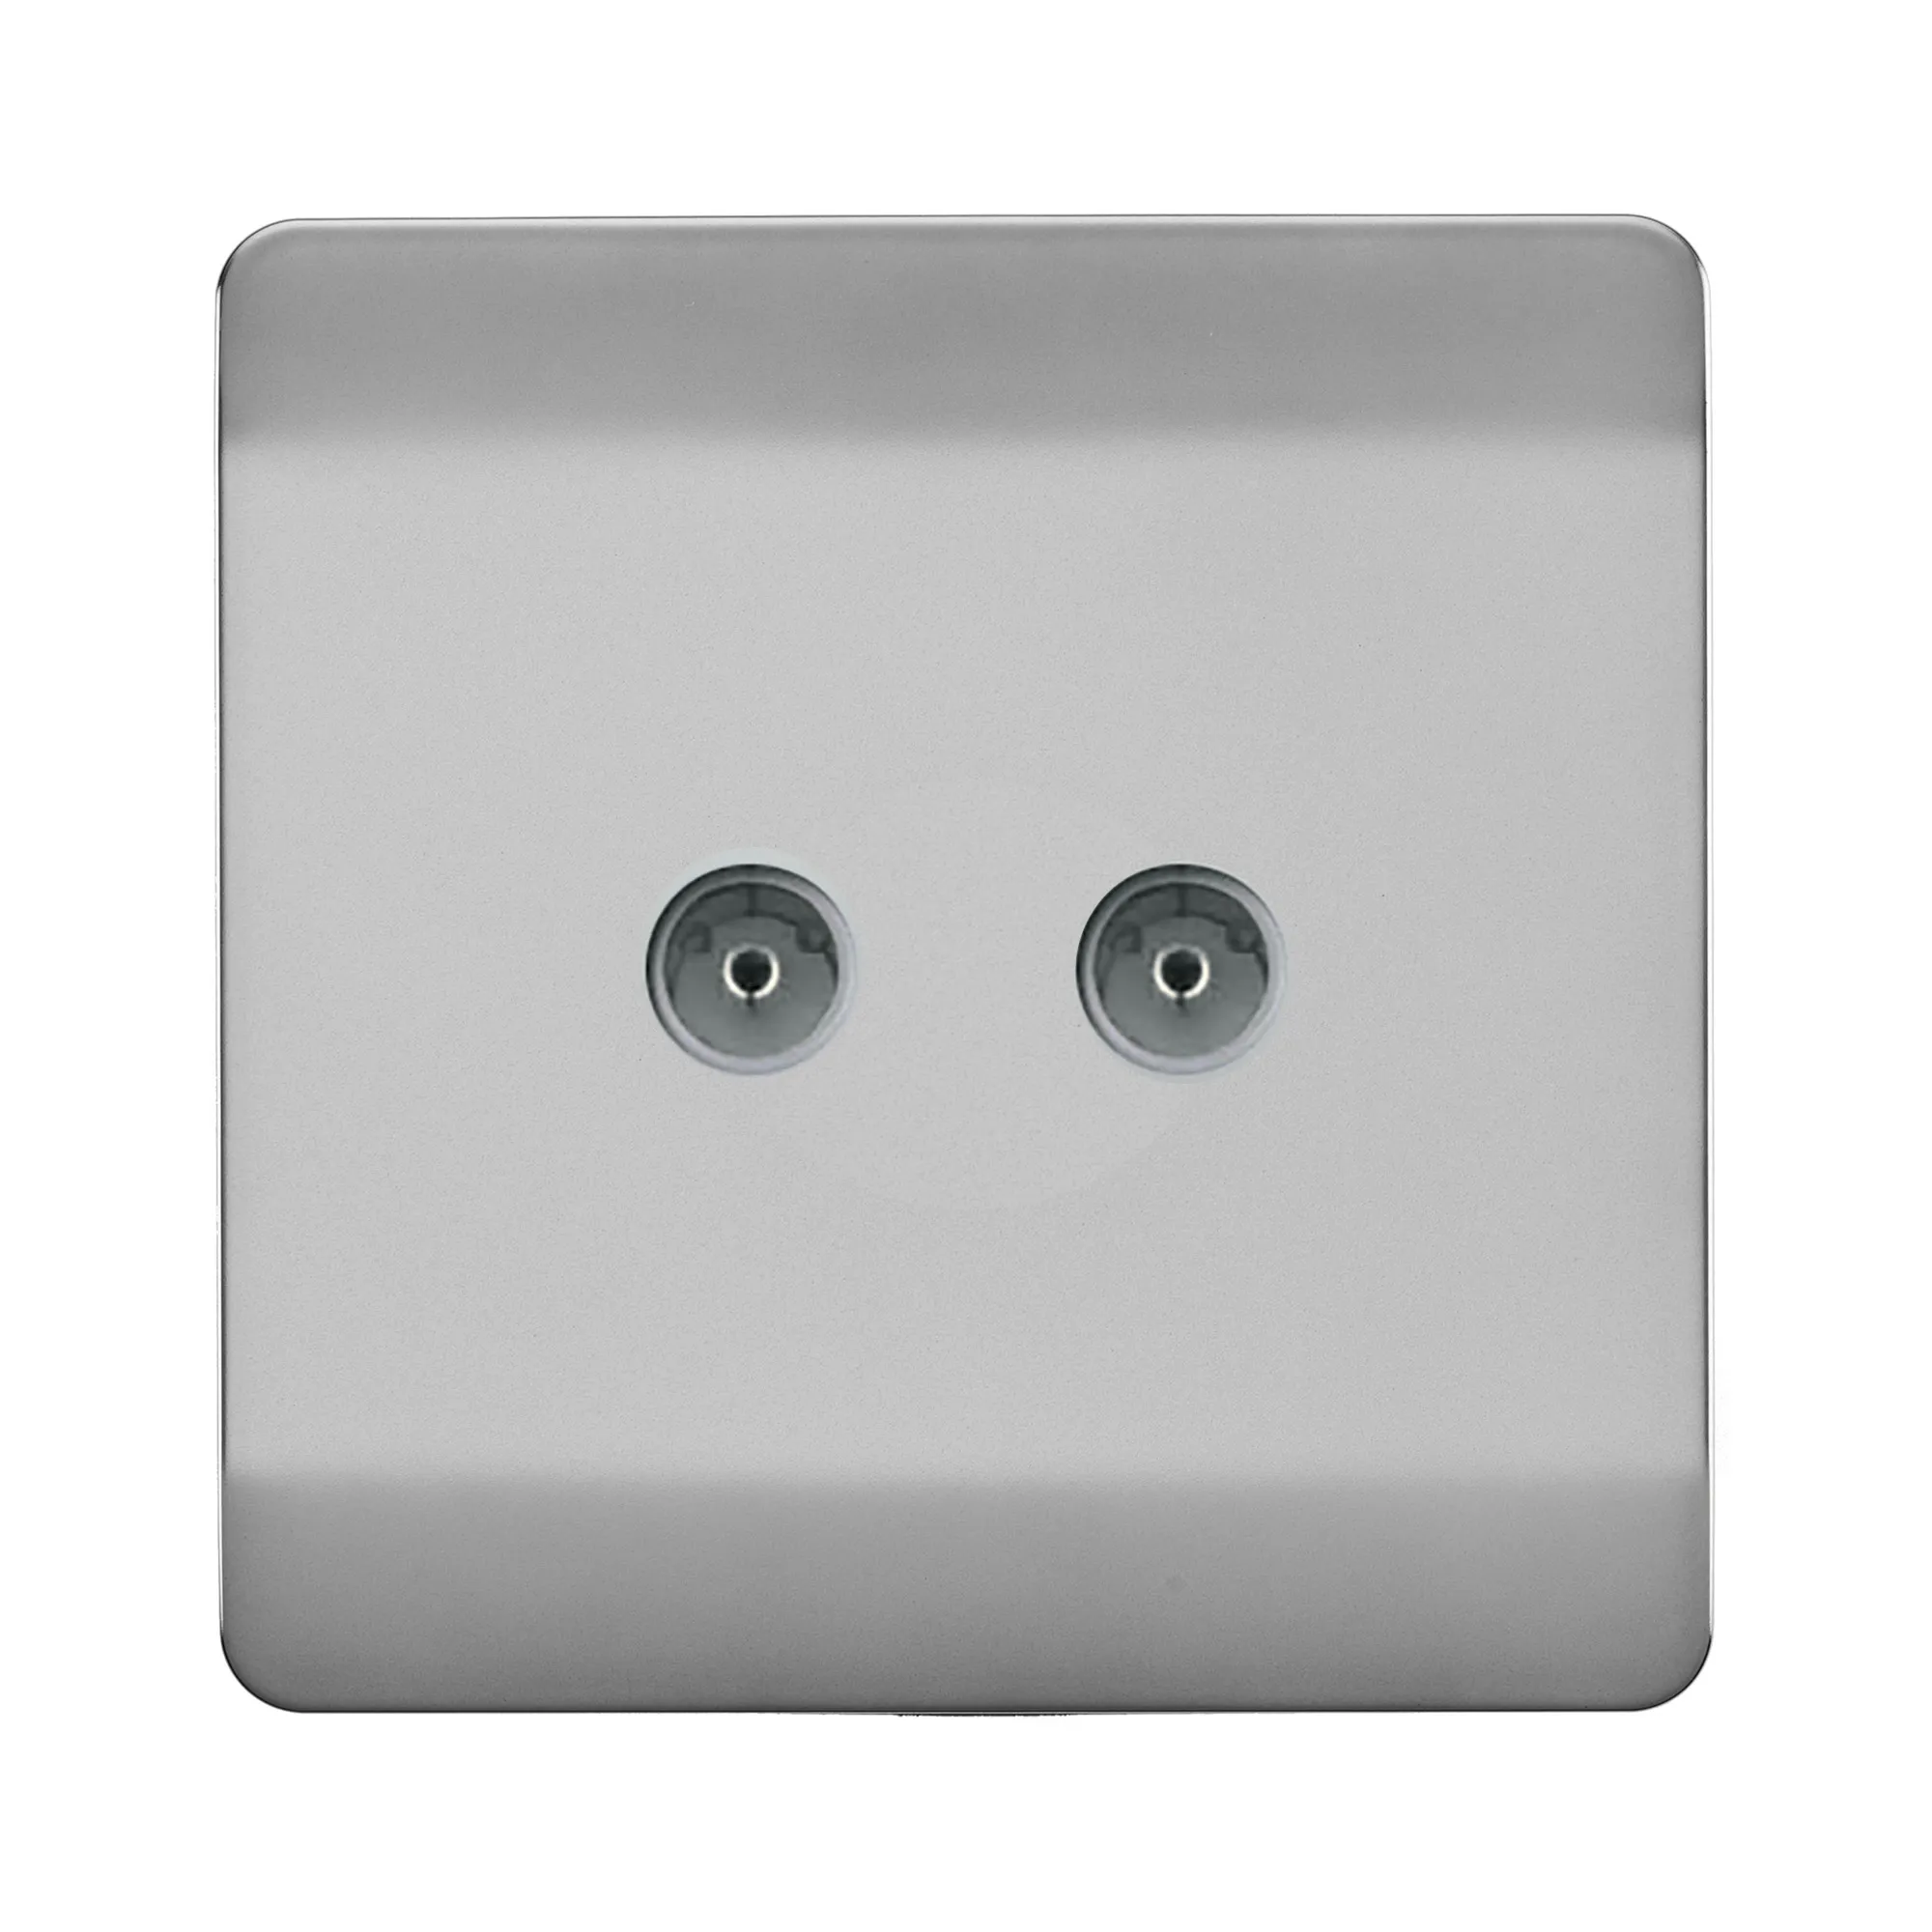 Twin TV Co-Axial Outlet Brushed Steel